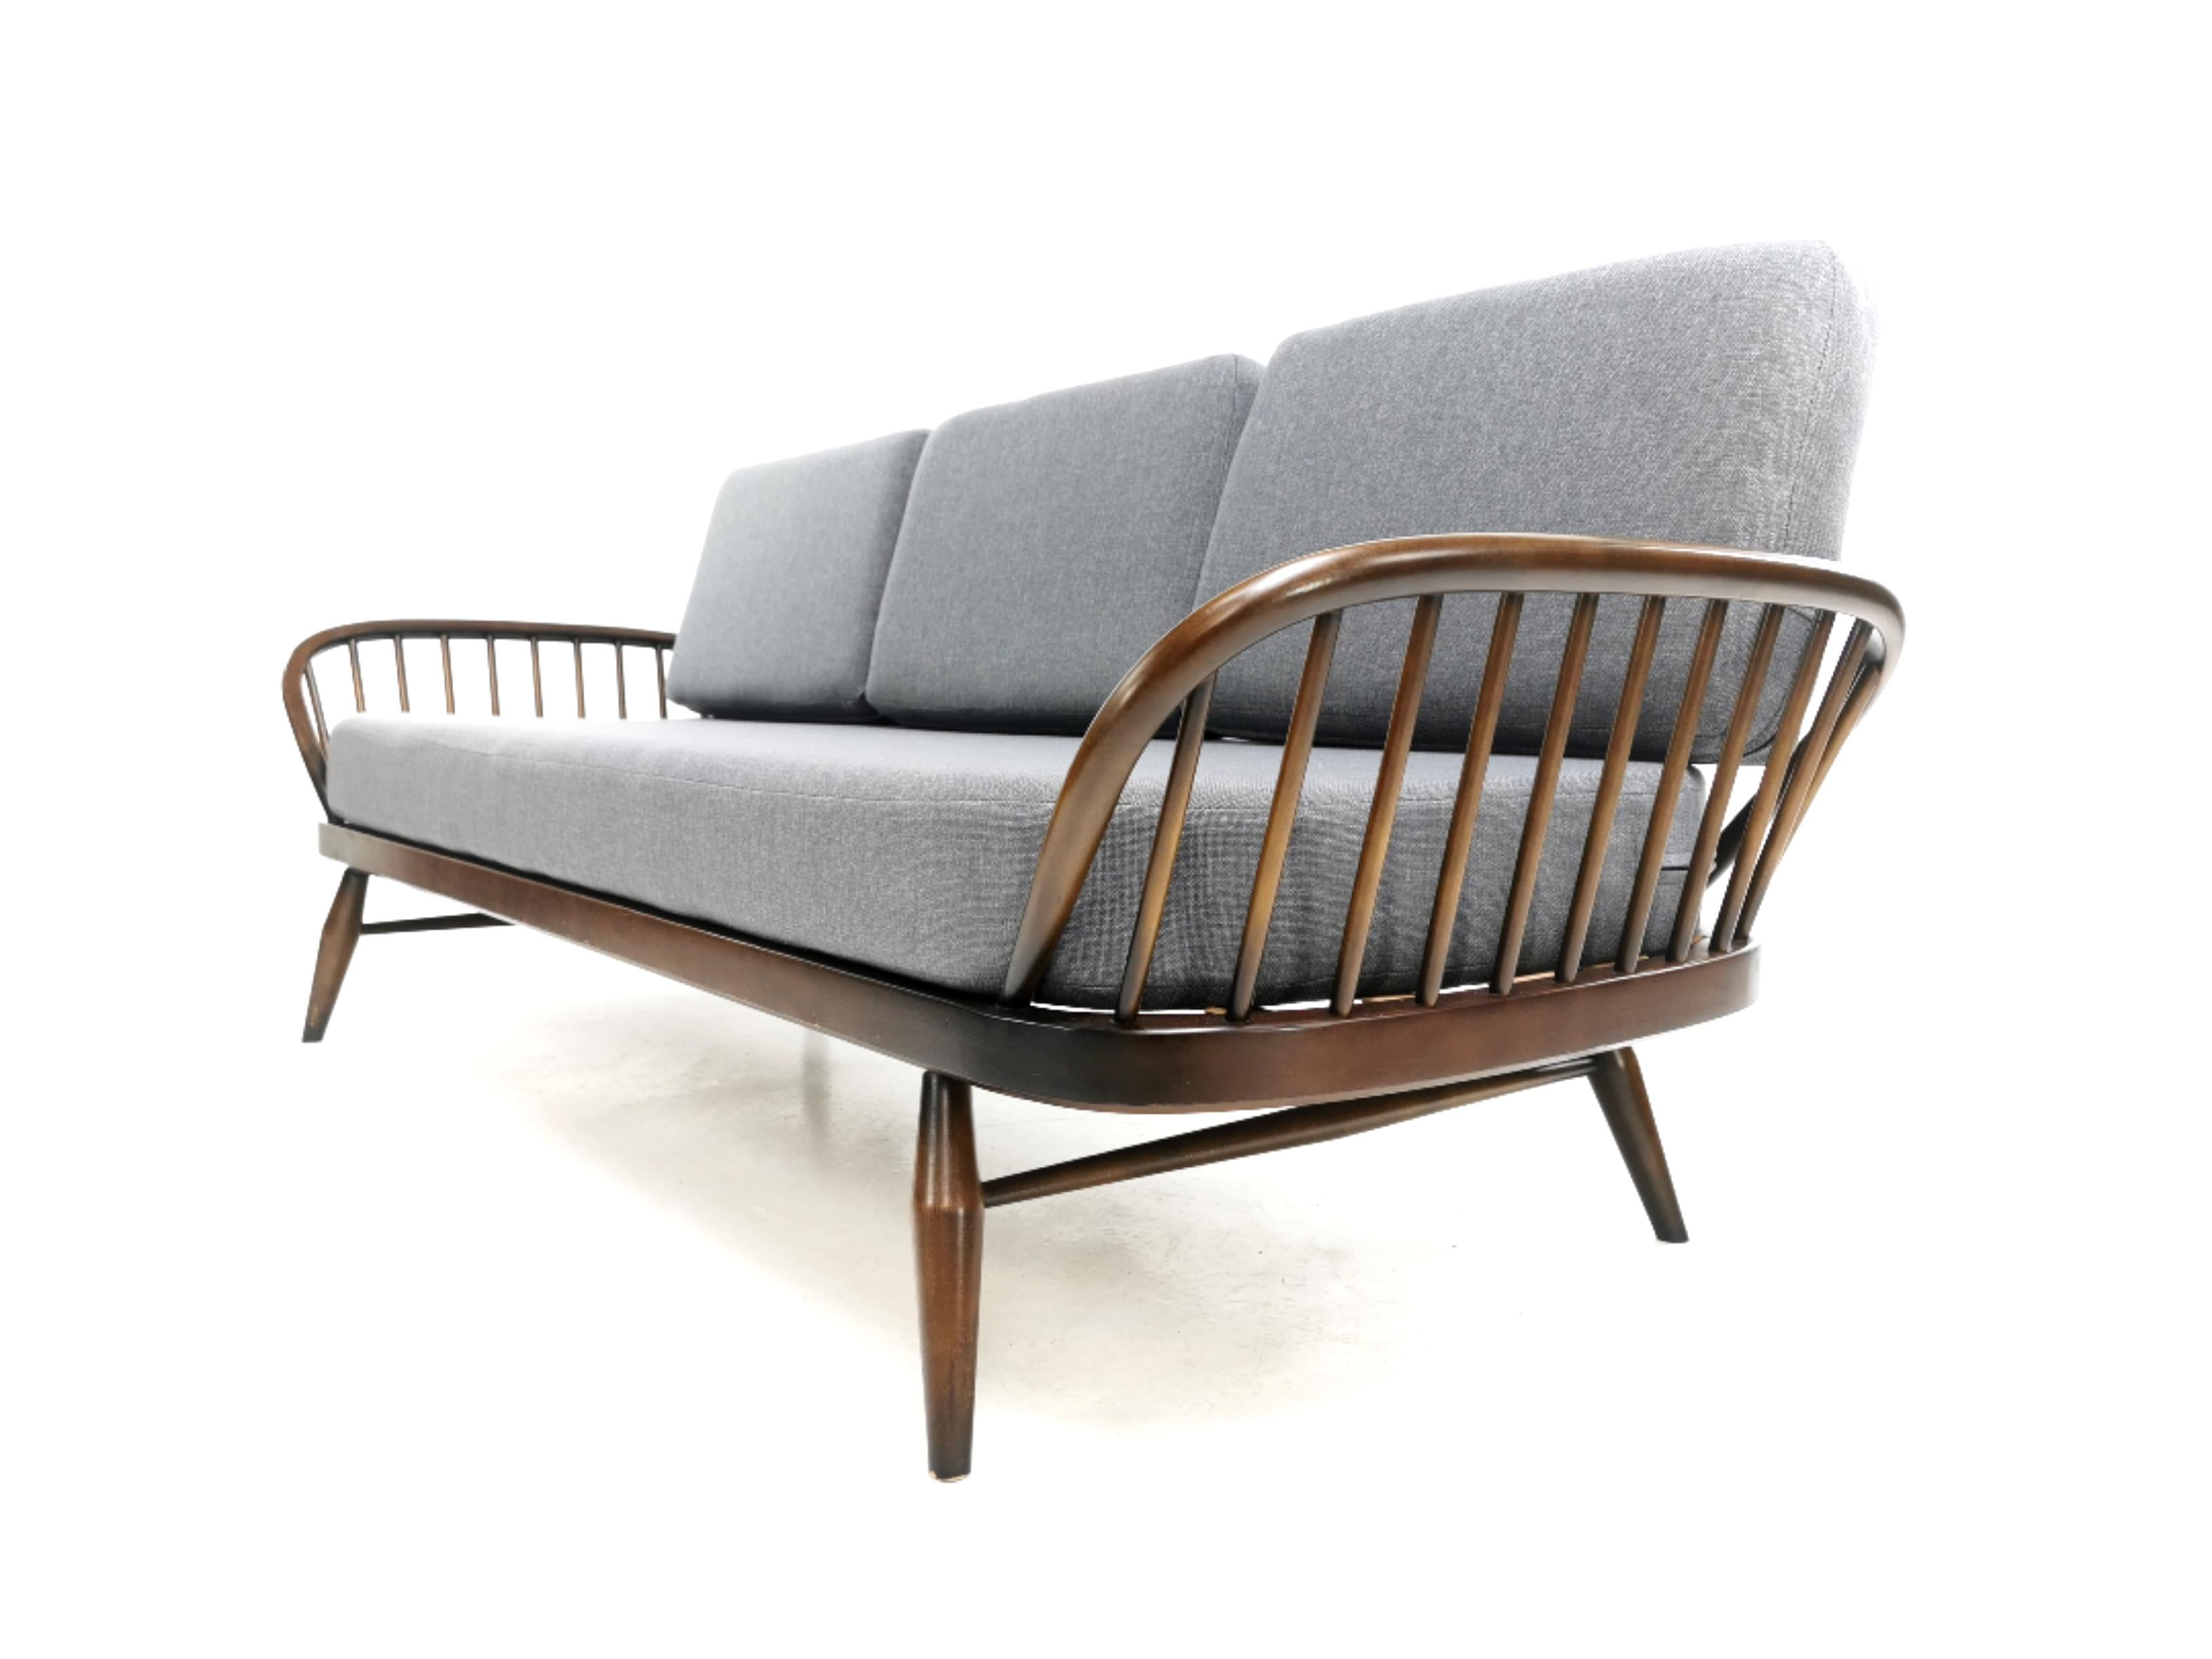 20th Century Daybed Sofa Designed by Lucian Ercolani and Manufactured by Ercol in England